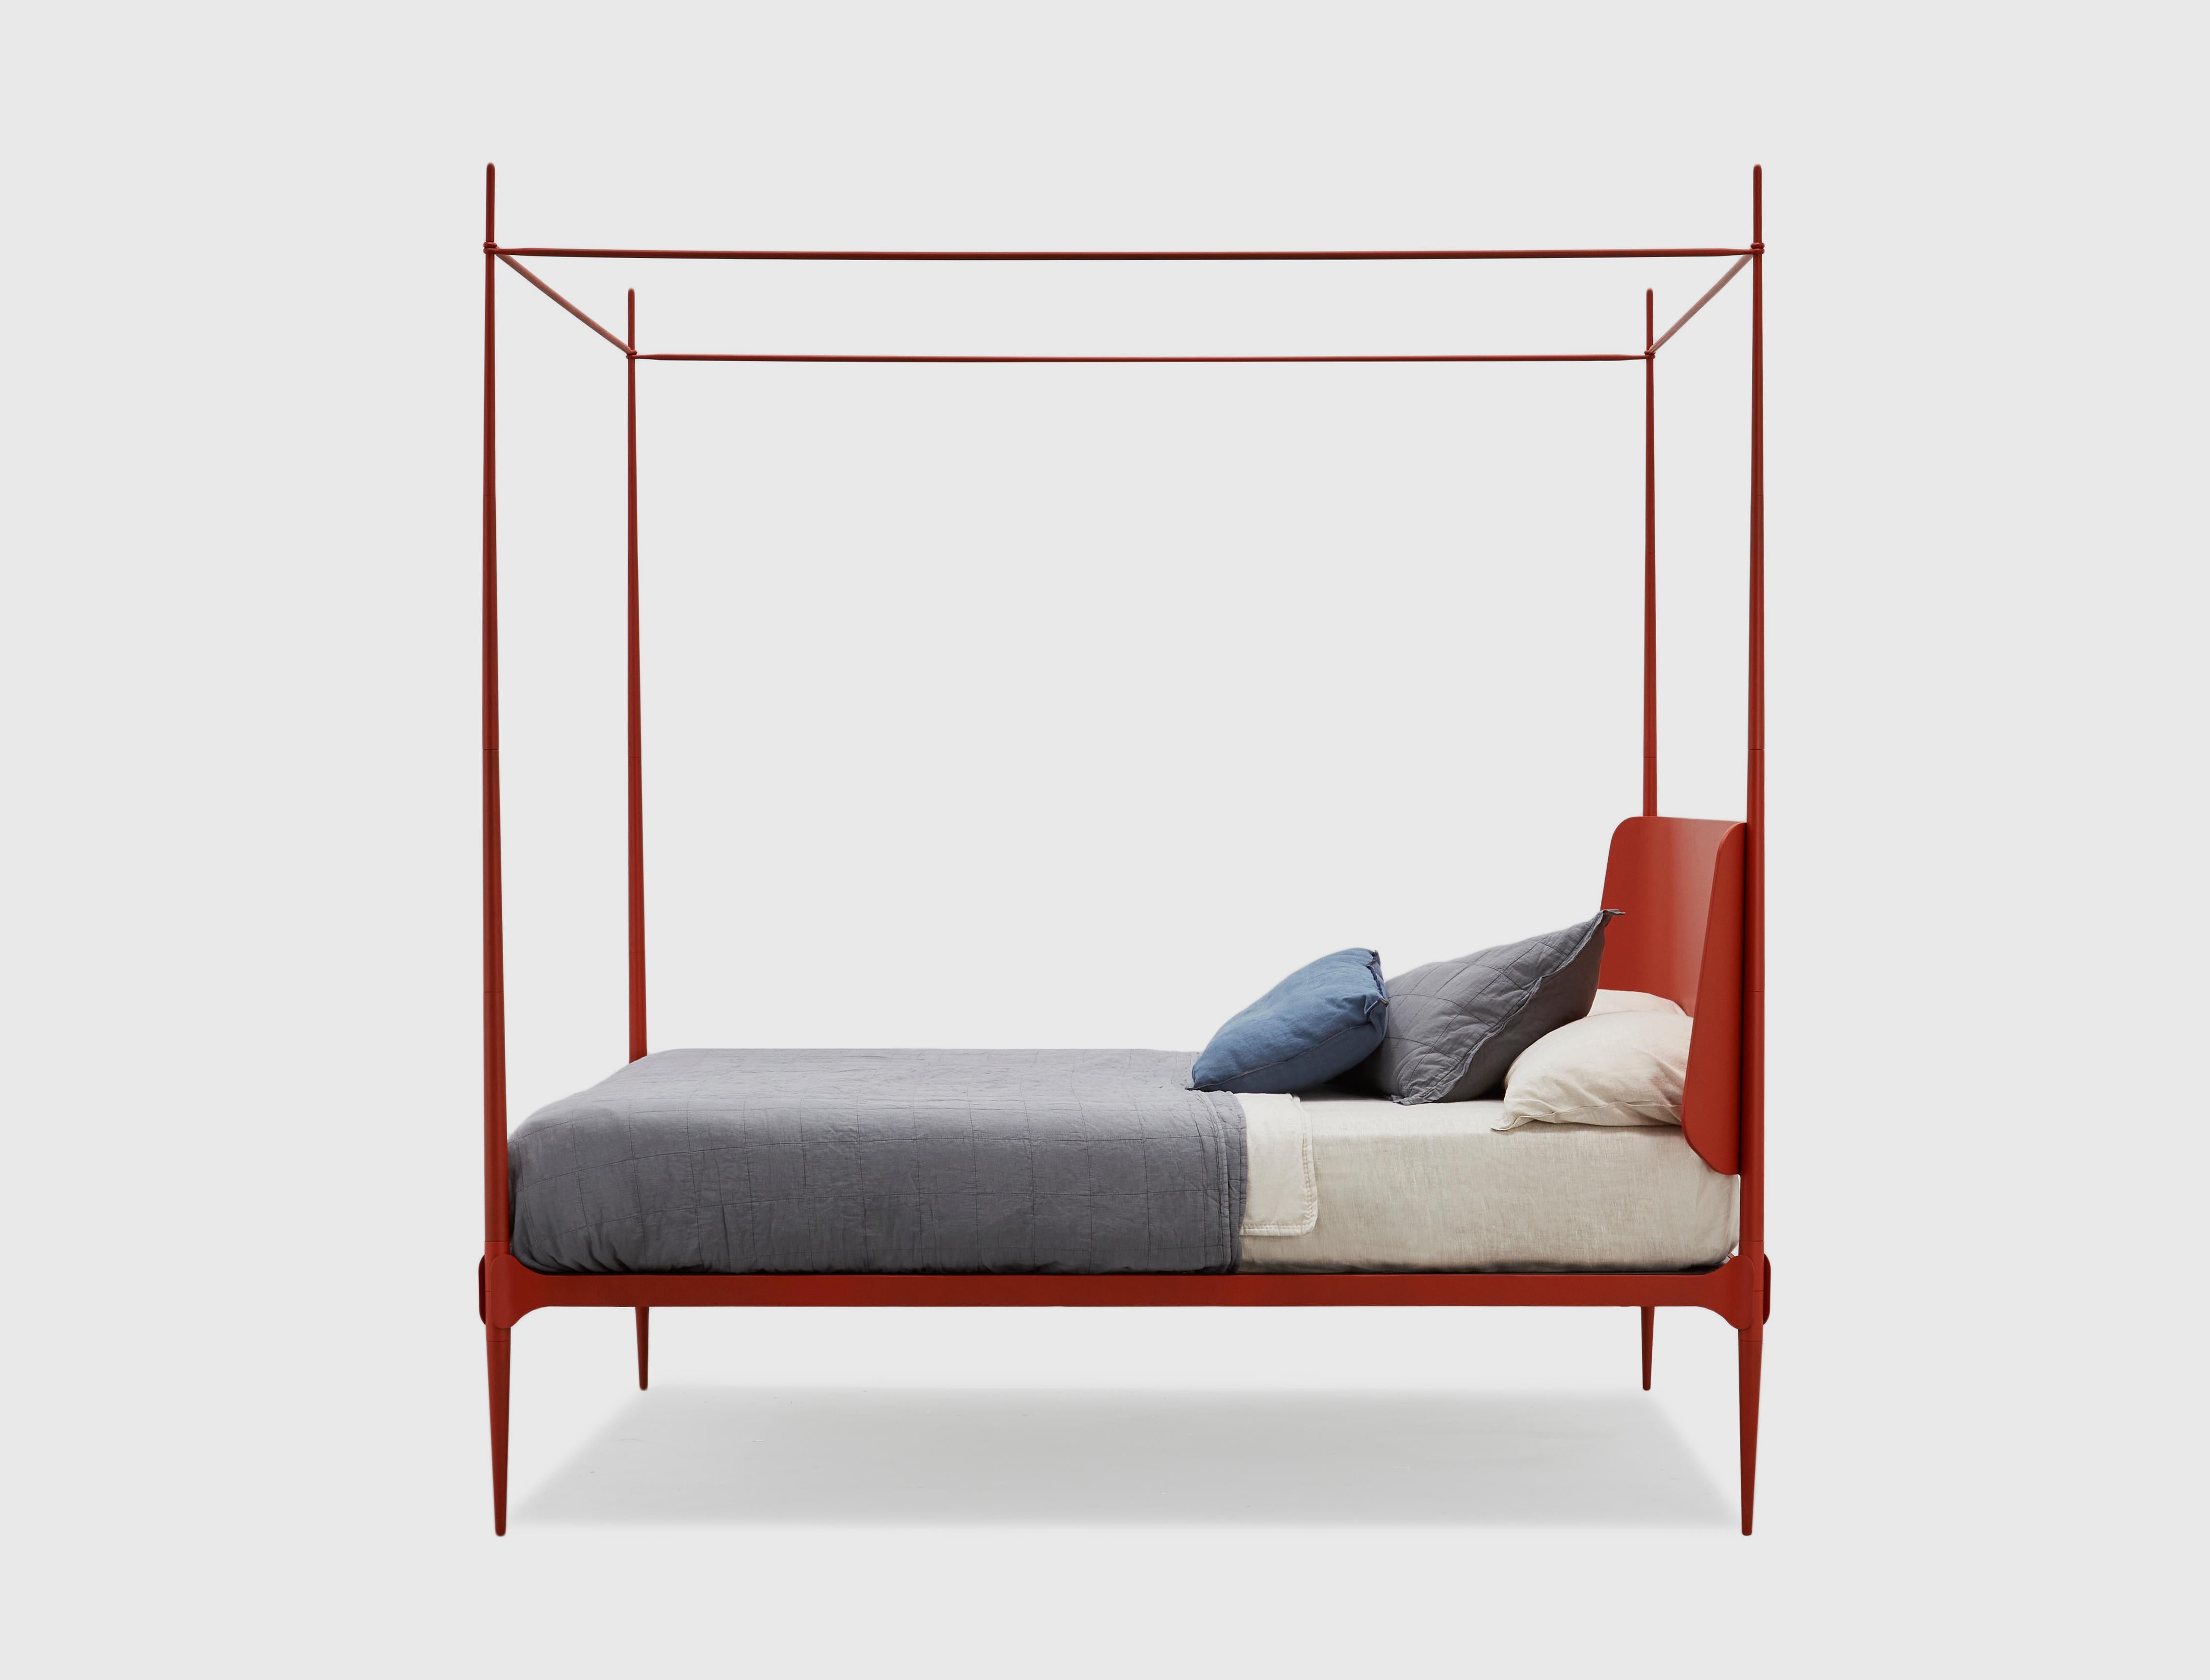 Tradizione della forma e soluzioni di design. A bed with an appealing hybrid aesthetic language, characterized by a junction-between base and posts-that emphasizes the elements of the composition. 
Clamp's design has several distinctive details that